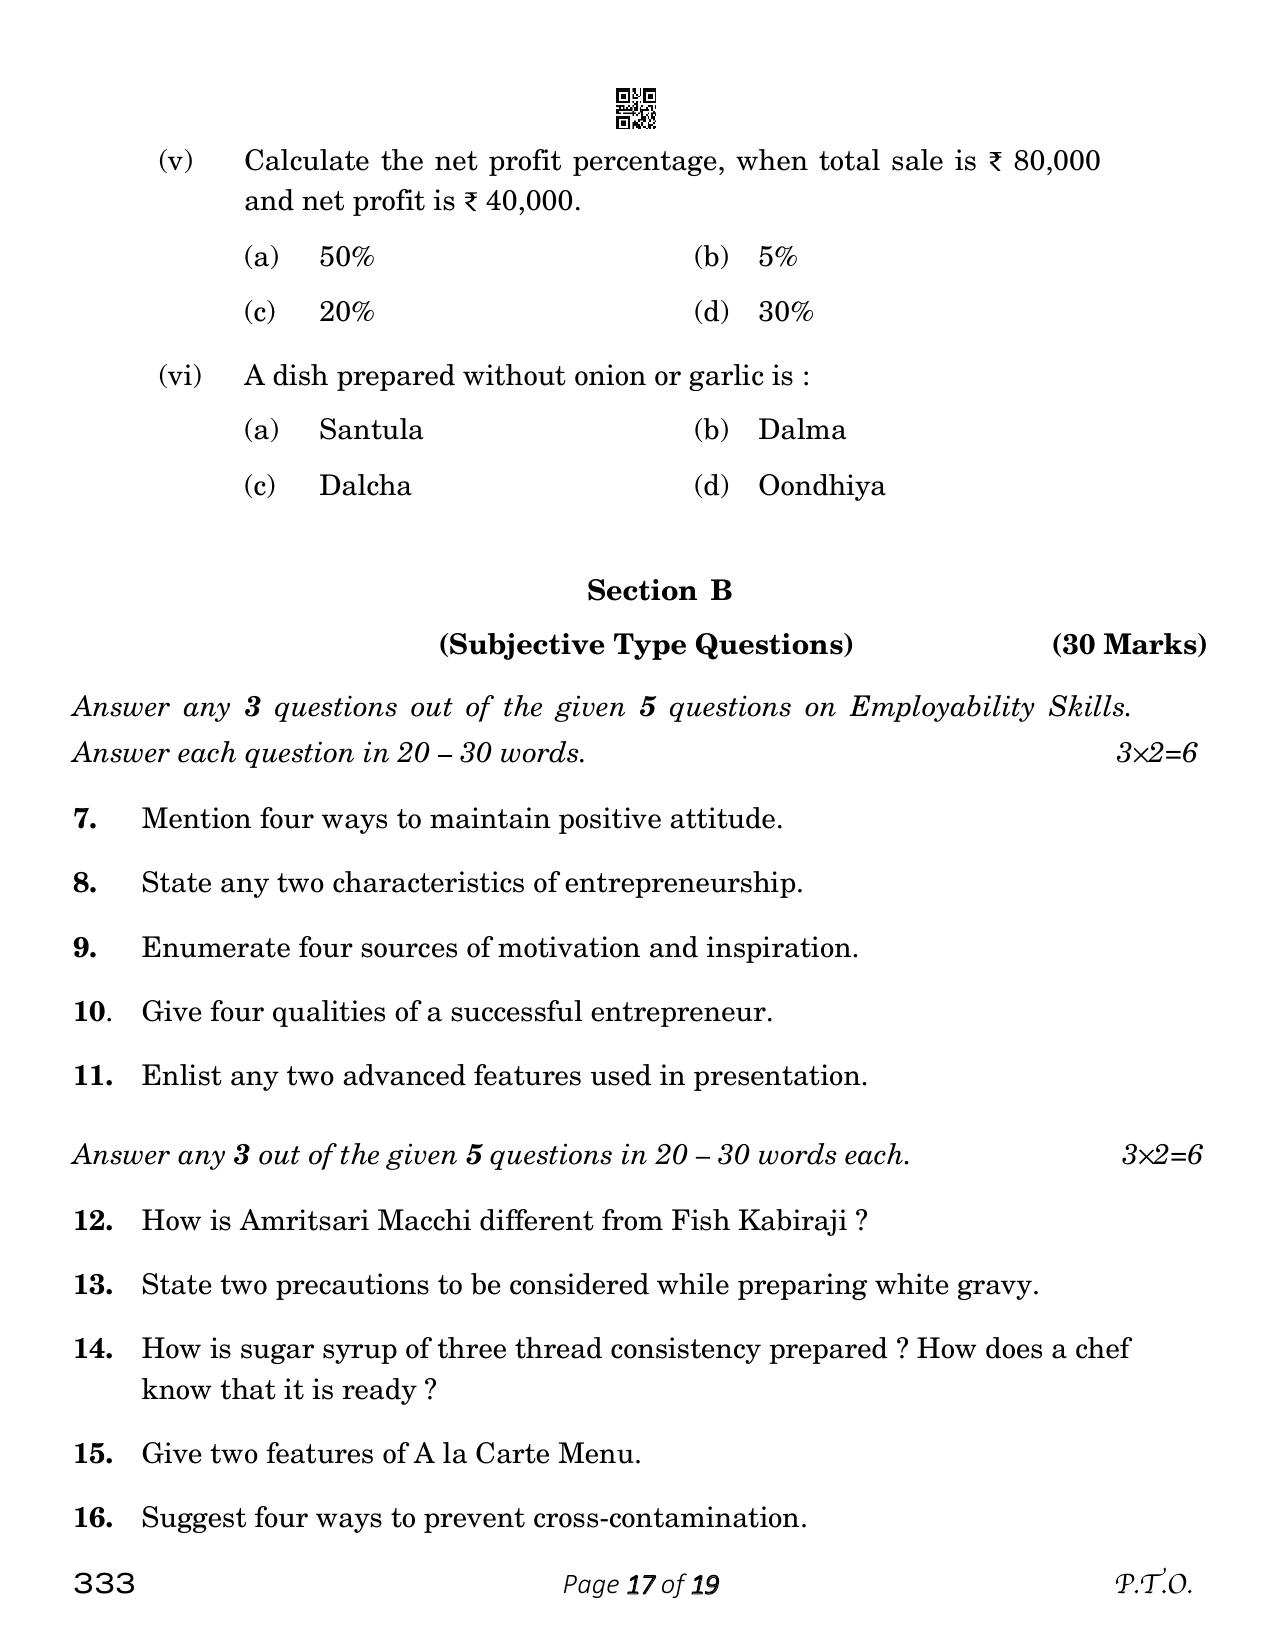 CBSE Class 12 food Production (Compartment) 2023 Question Paper - Page 17